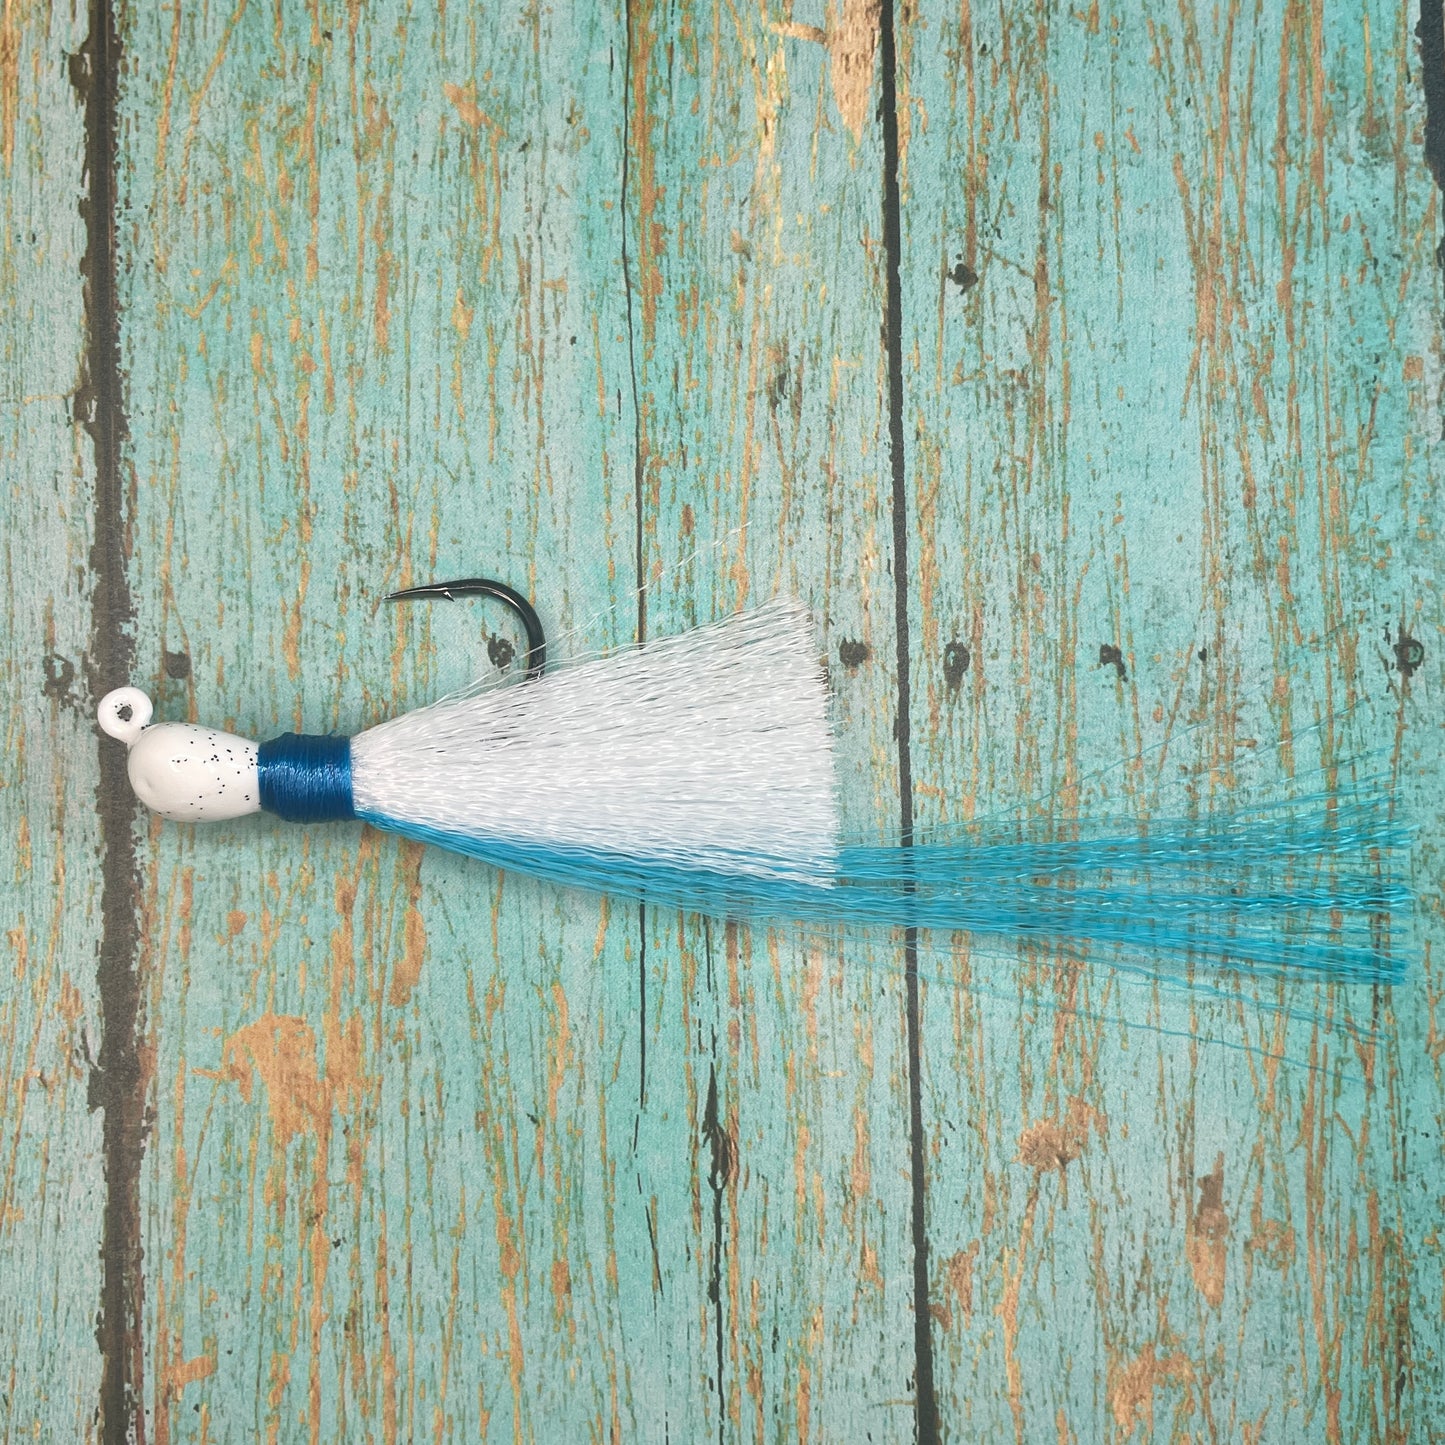 Mini Flare Hawk Jig. Peacock and Snook Candy